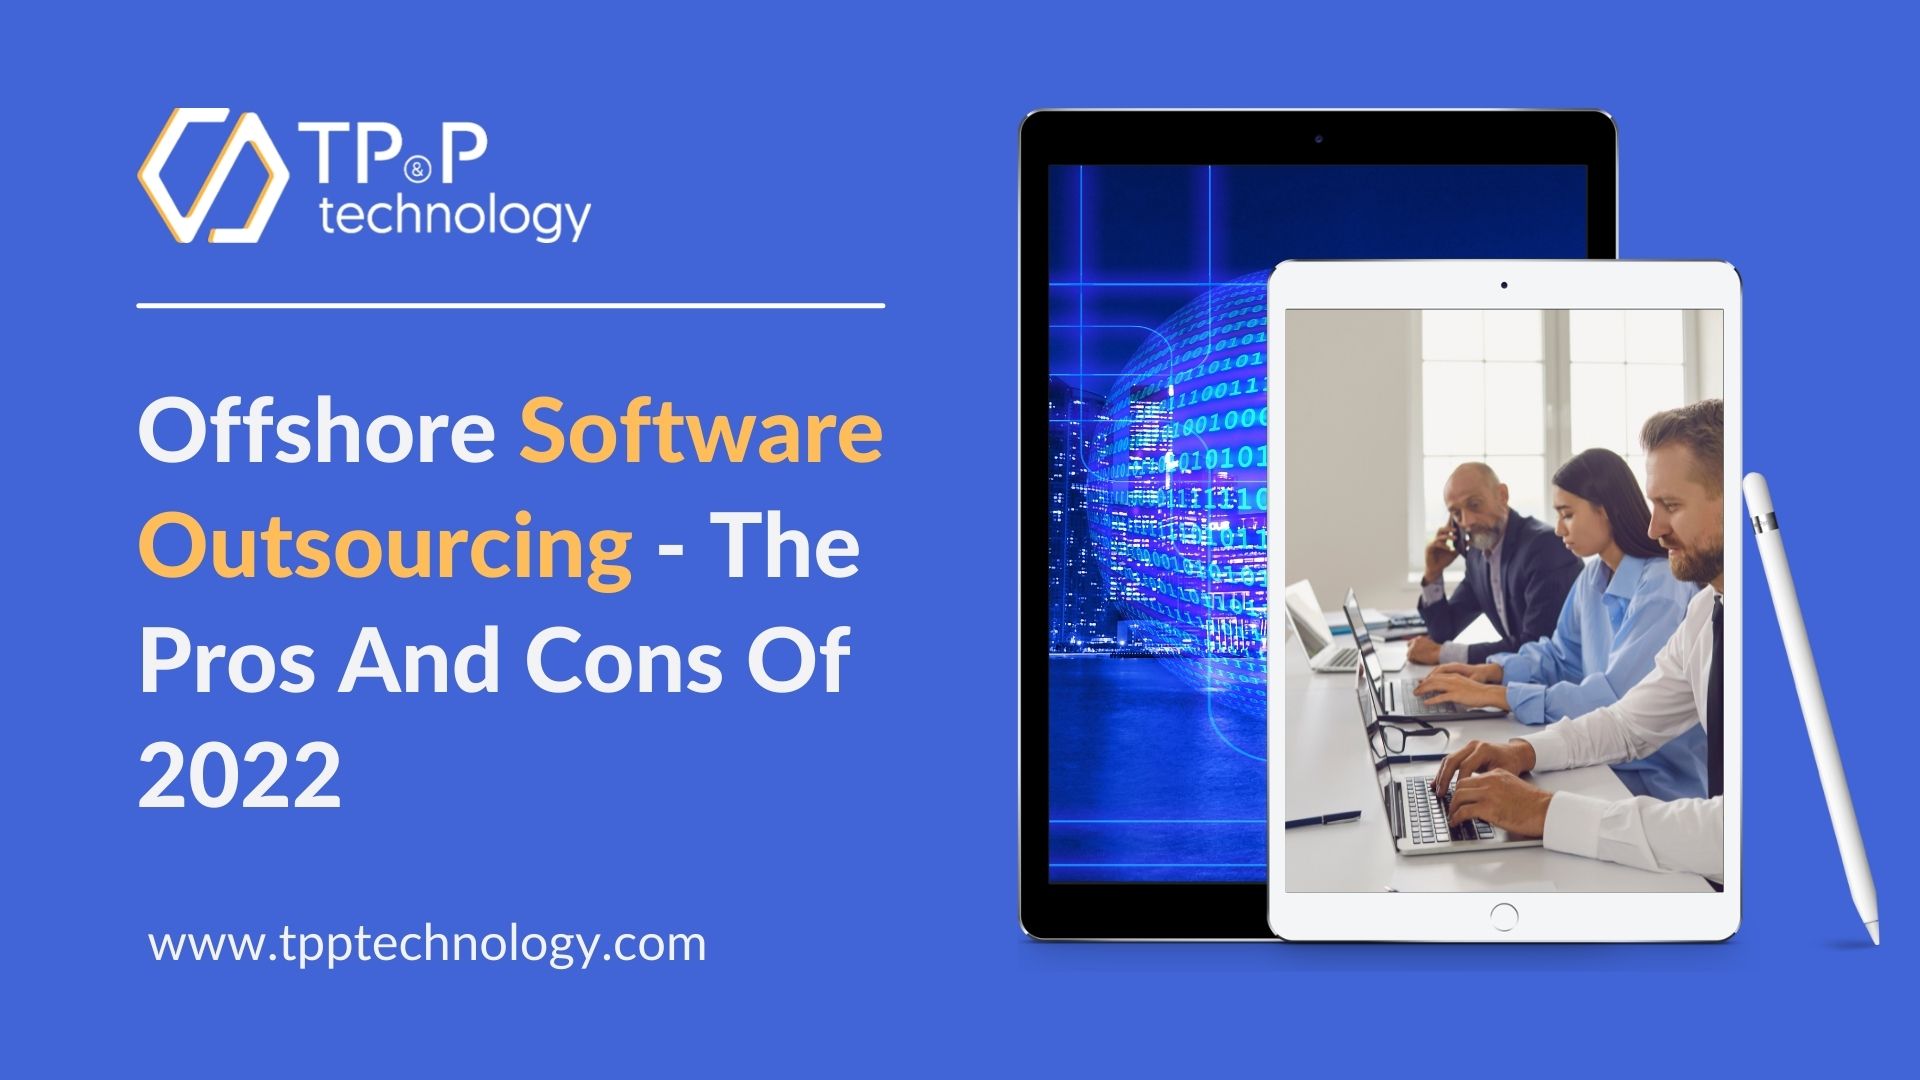 Offshore Software Outsourcing In 2022 - The Pros And Cons 